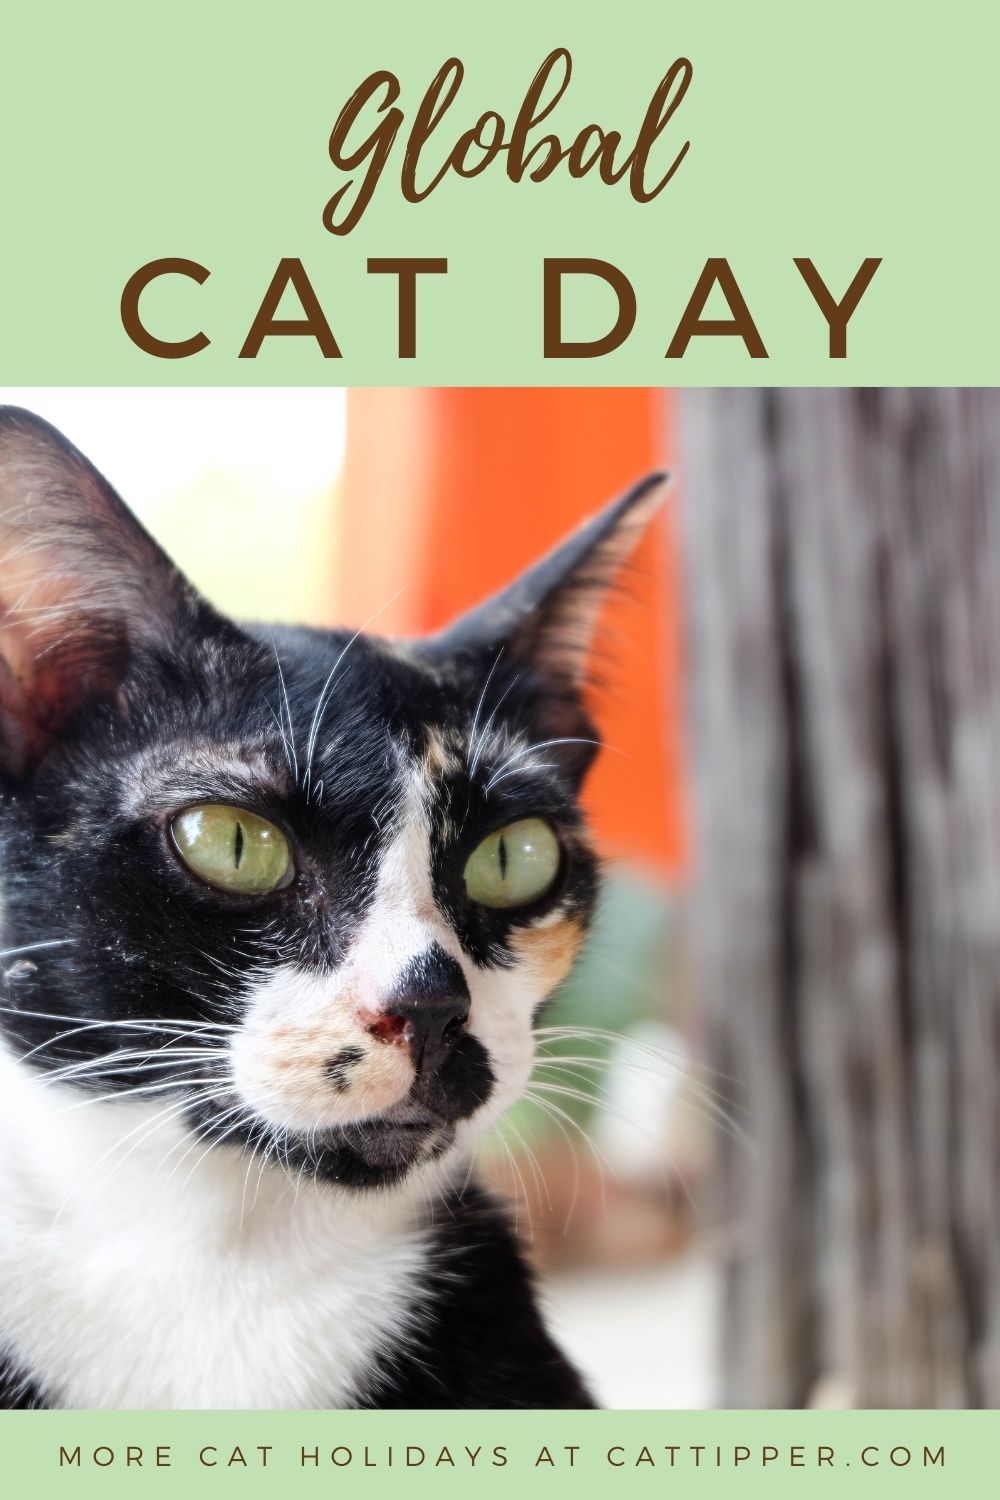 Global Cat Day {A Day to Honor Community Cats!}